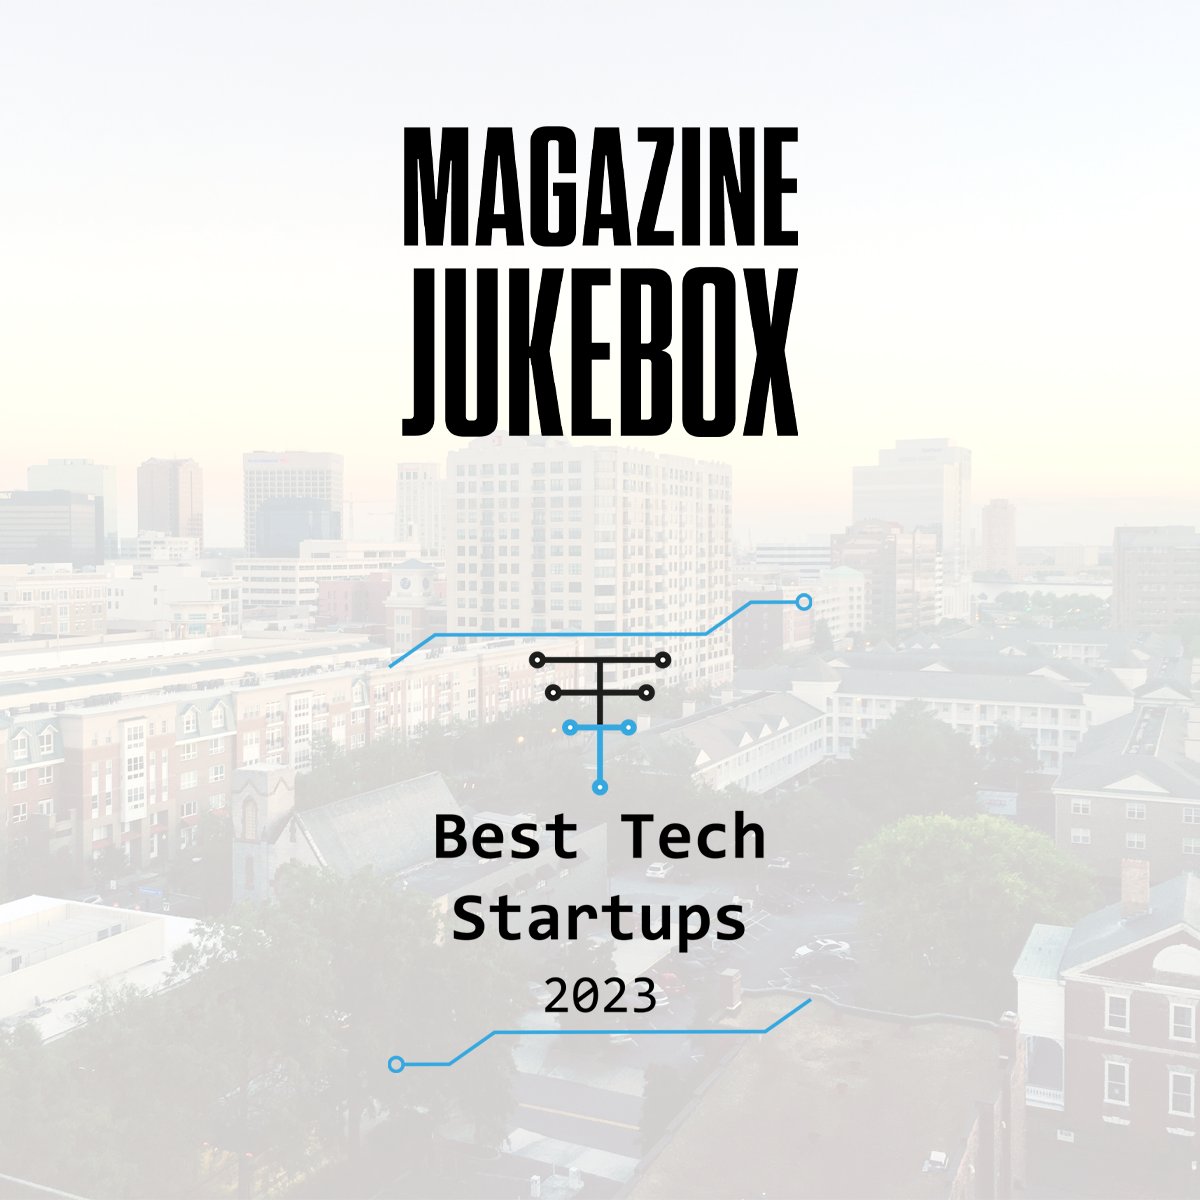 Around this time last year, we were recognized as one of the Top Tech Startups in Norfolk by @thetechtrib. 💪 We’ve made so many great improvements and additions to Magazine Jukebox this past year. So proud of all the progress we’ve made and looking forward to the future! ⭐️